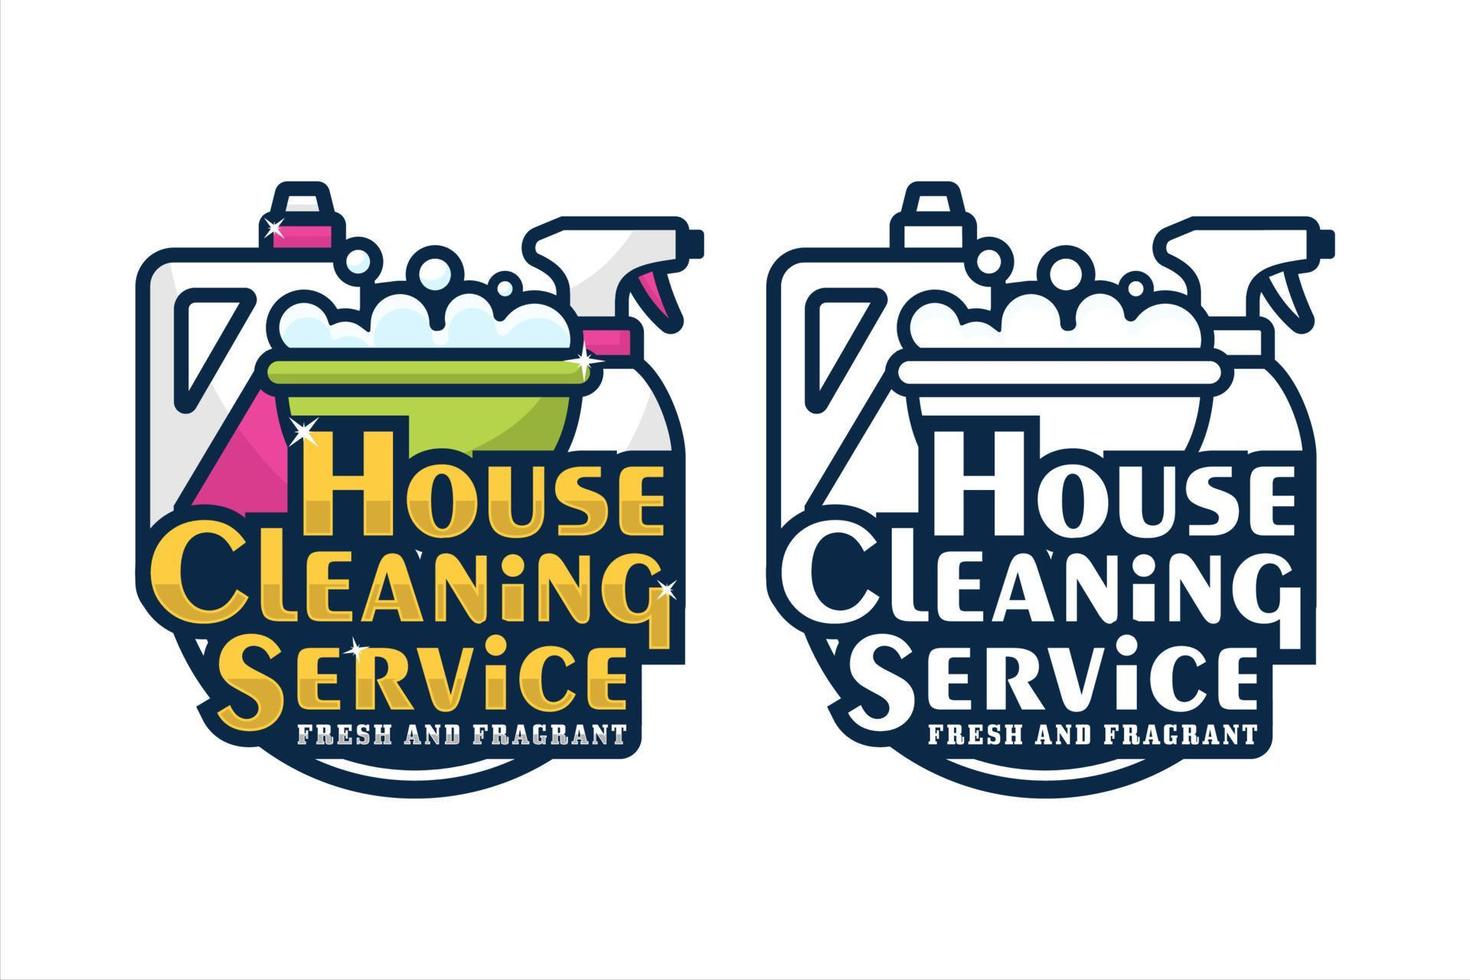 House cleaning service design logo.eps vector